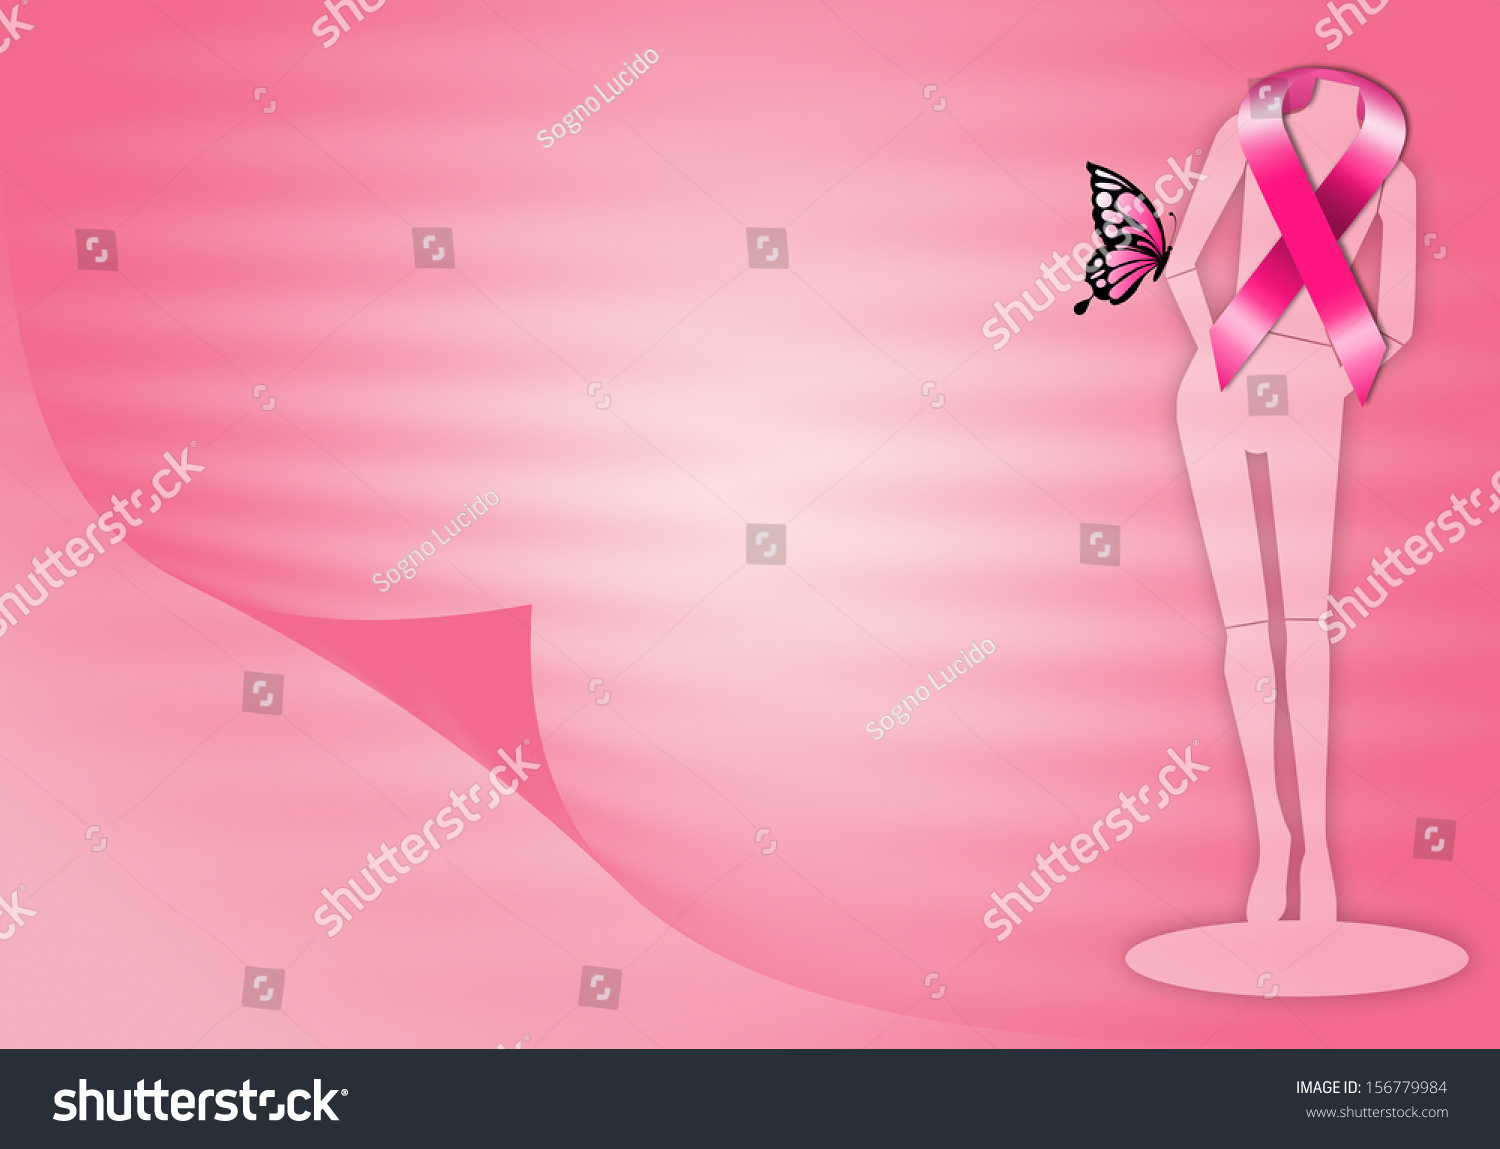 Breast cancer prevention on pink background #156779984